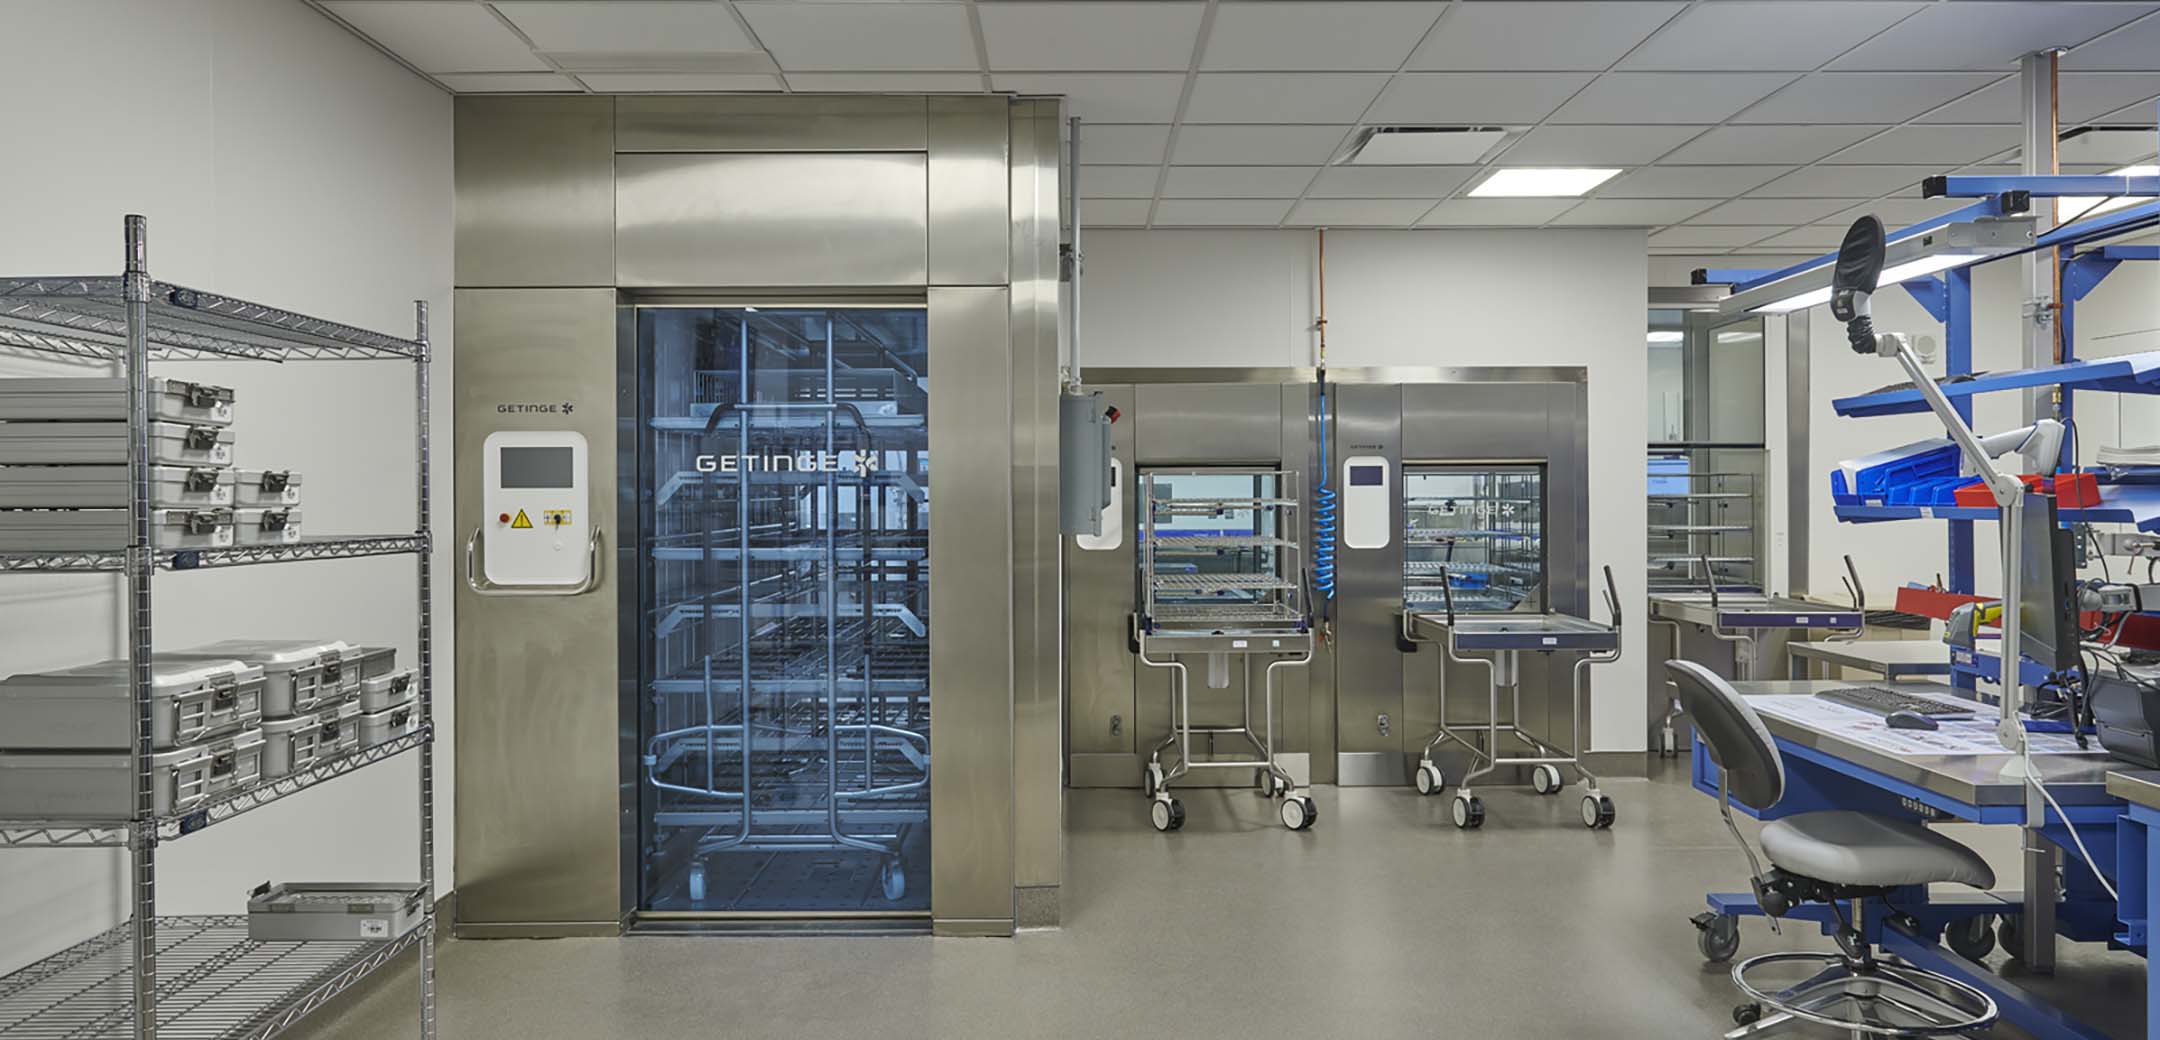 An interior image of the Penn Radnor Advanced Outpatient Care Center building showcasing the temperature controlled medical storage room and test facilities.